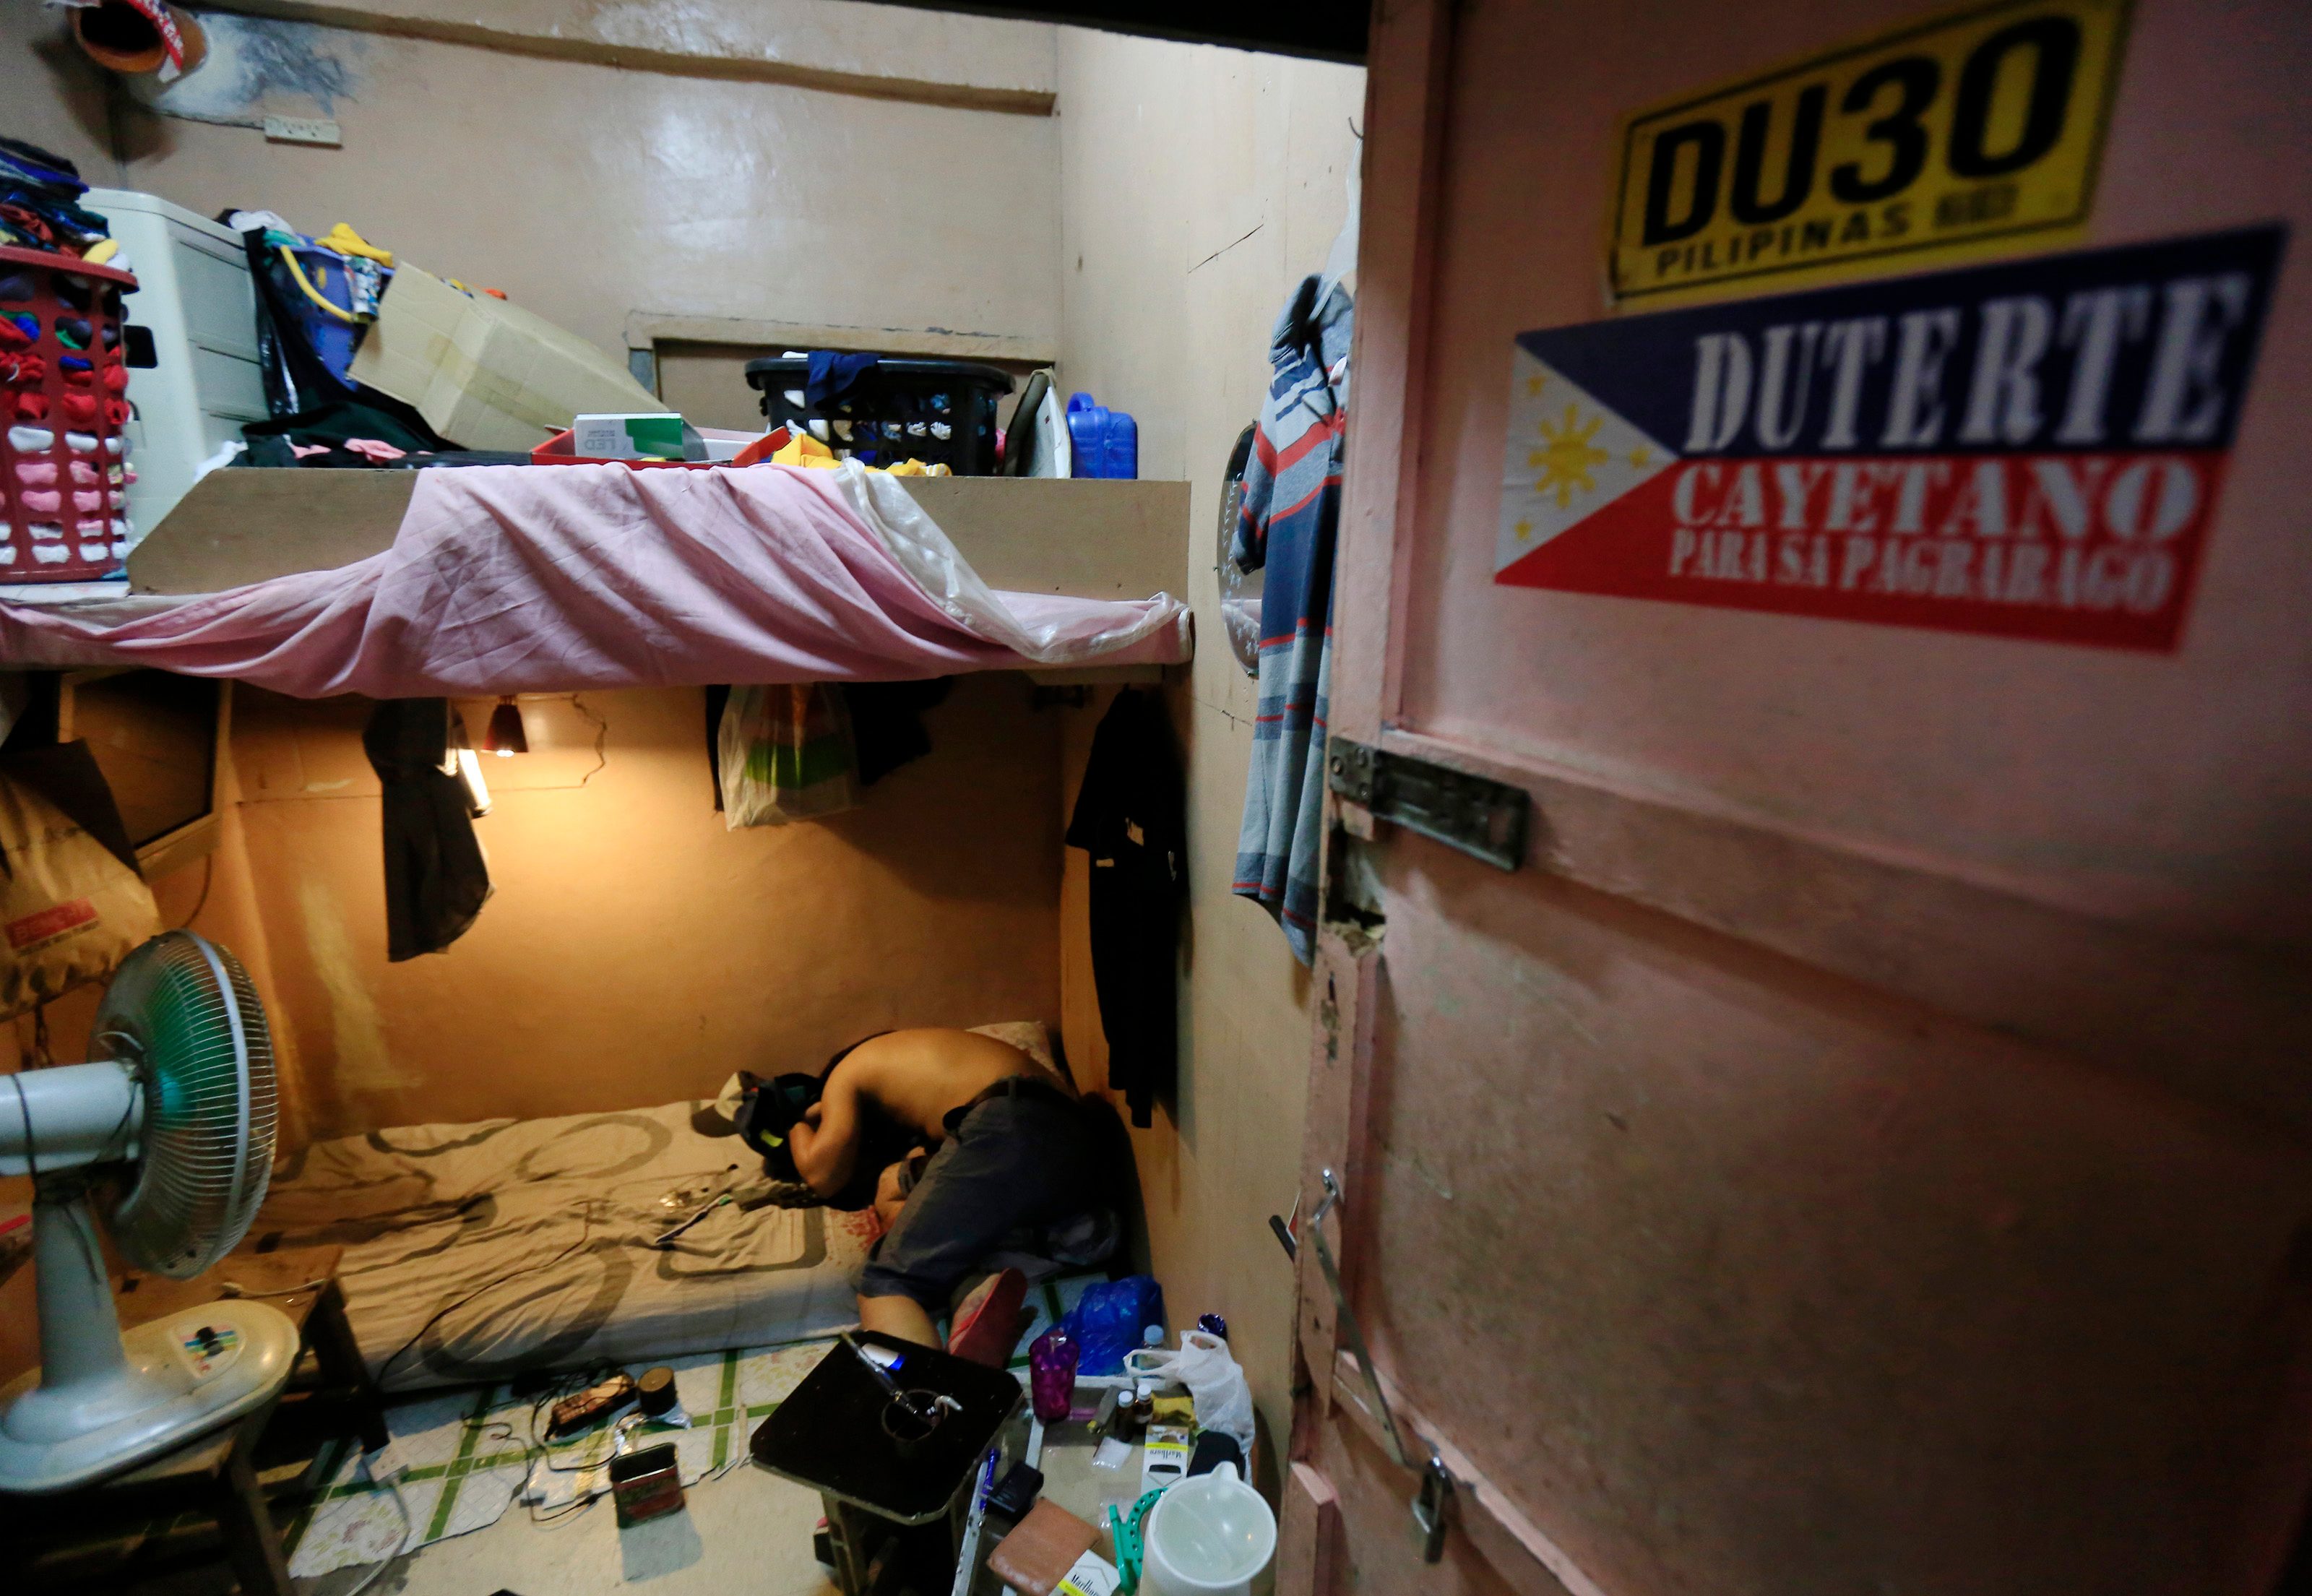 WAR ON DRUGS. A picture made available on 09 August 2016 shows a dead body following a police operation against illegal drugs inside a room in Manila. EUGENIO LORETO/EPA 